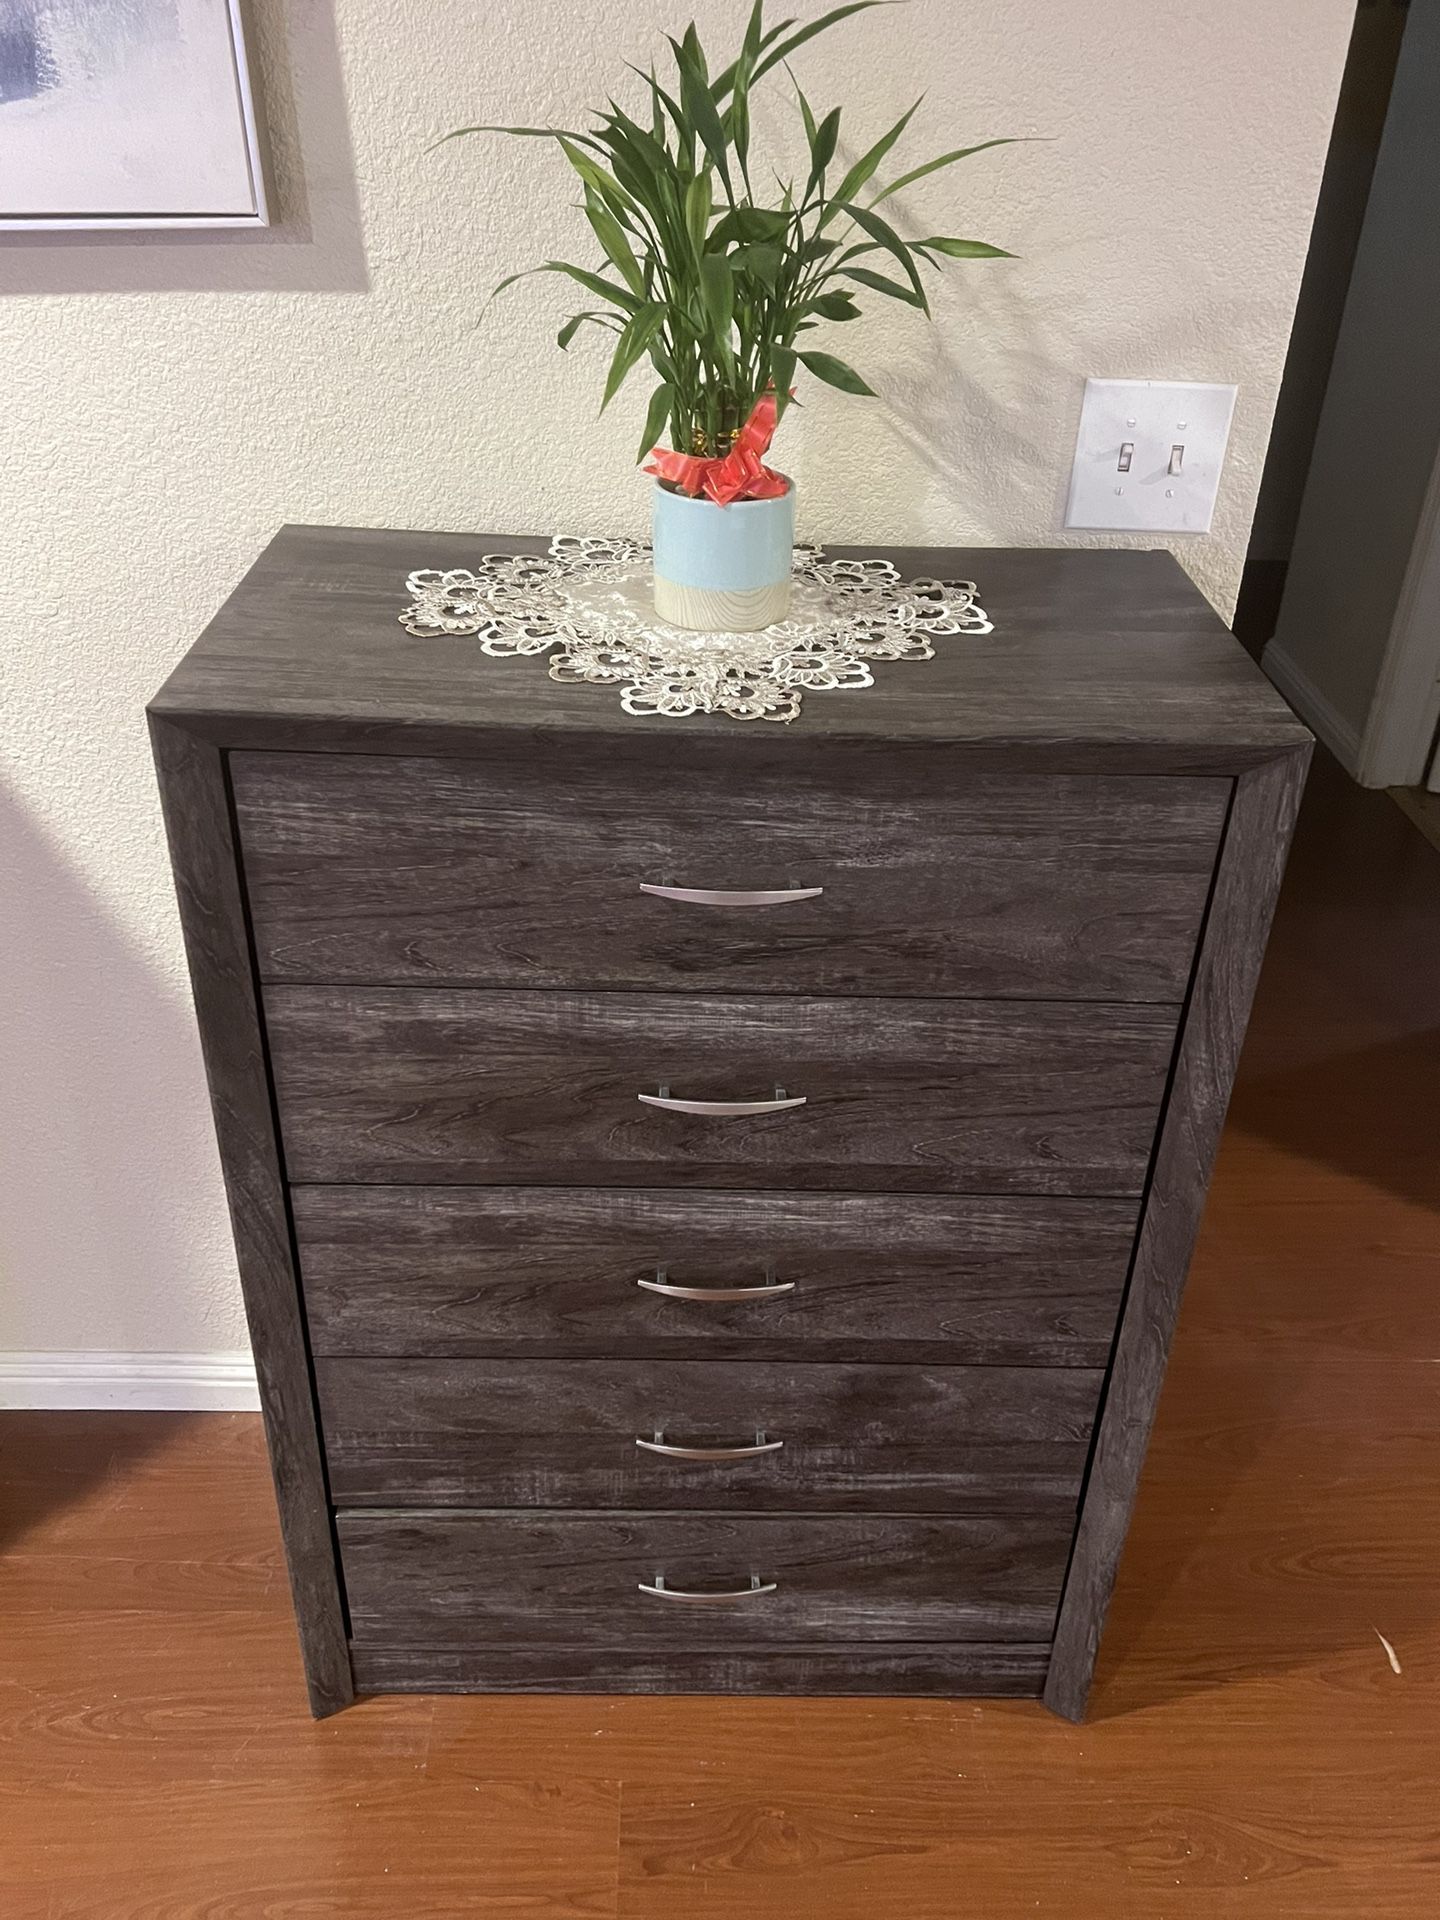 Tall dresser, with 5 drawers